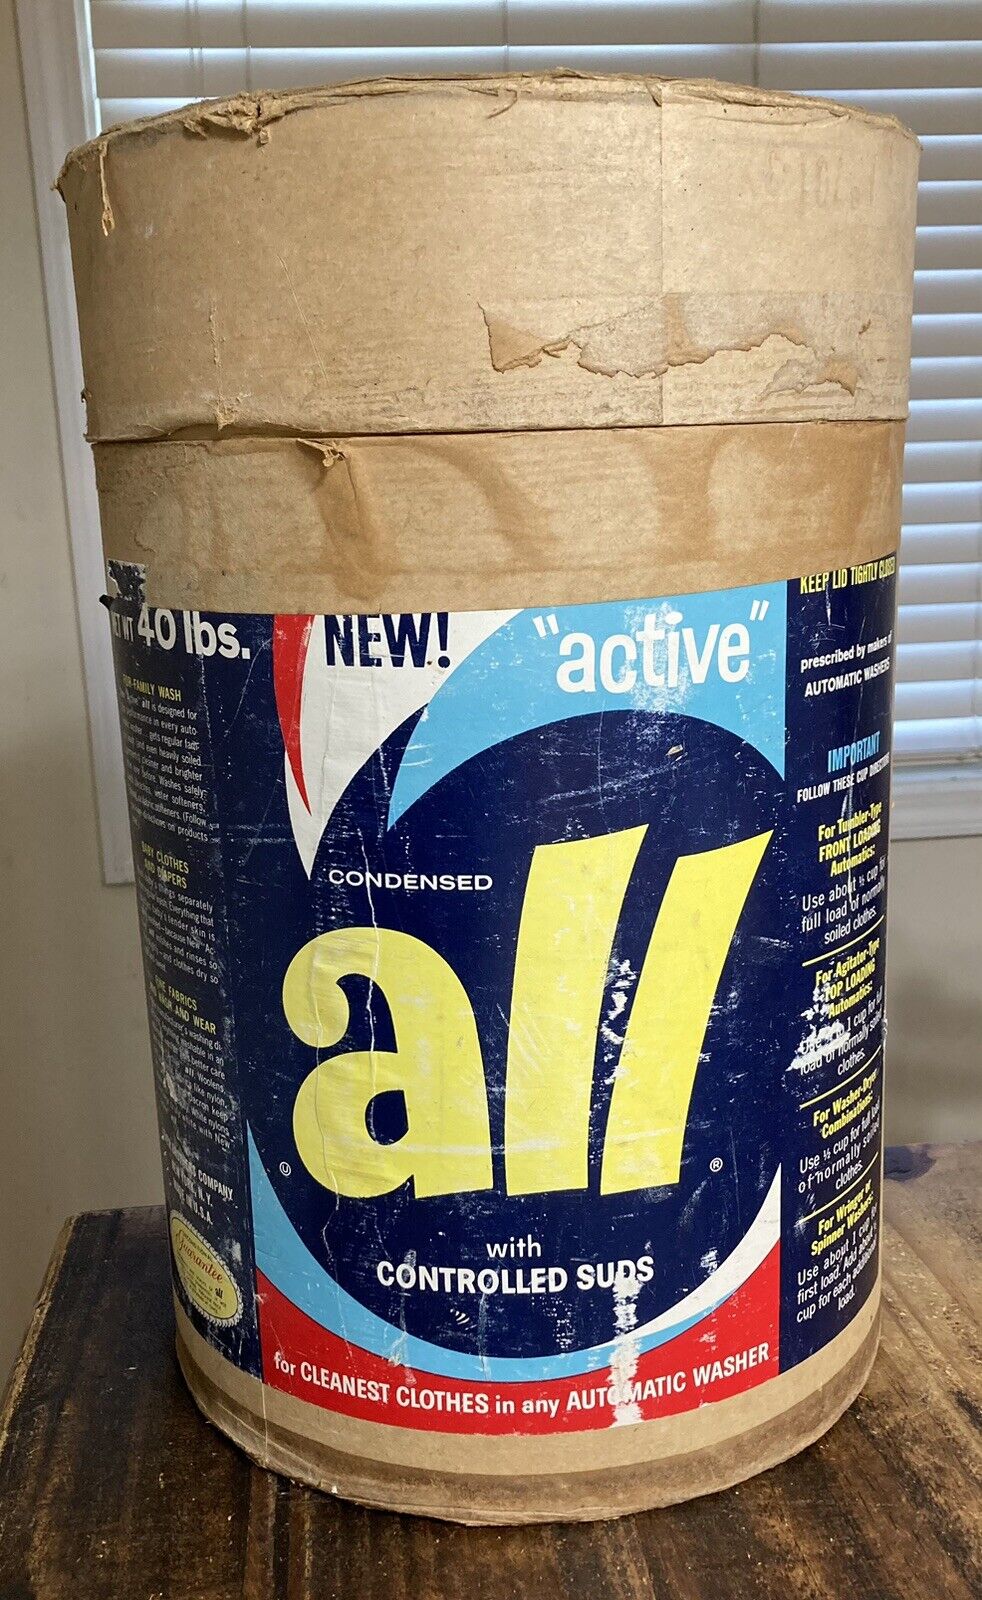 RARE Vintage 40 pound - ALL Laundry Washer Detergent - LARGE Cardboard Canister